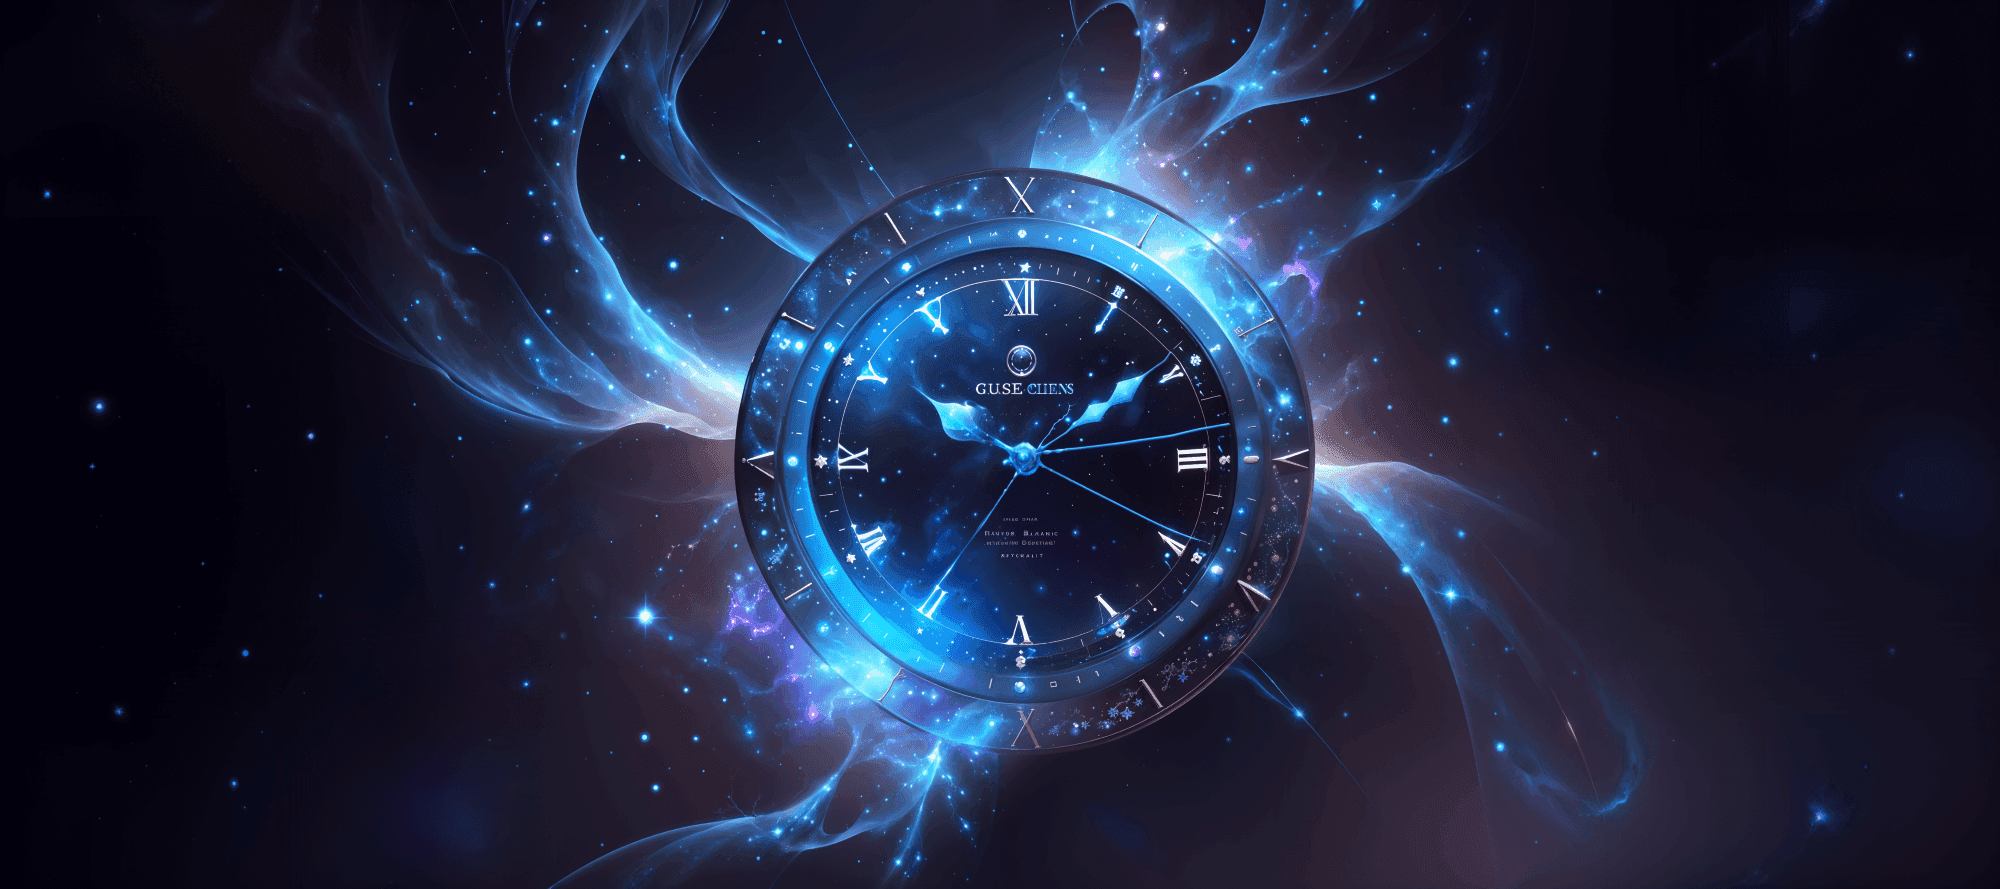 A clock floating in space surrounded by energy and power